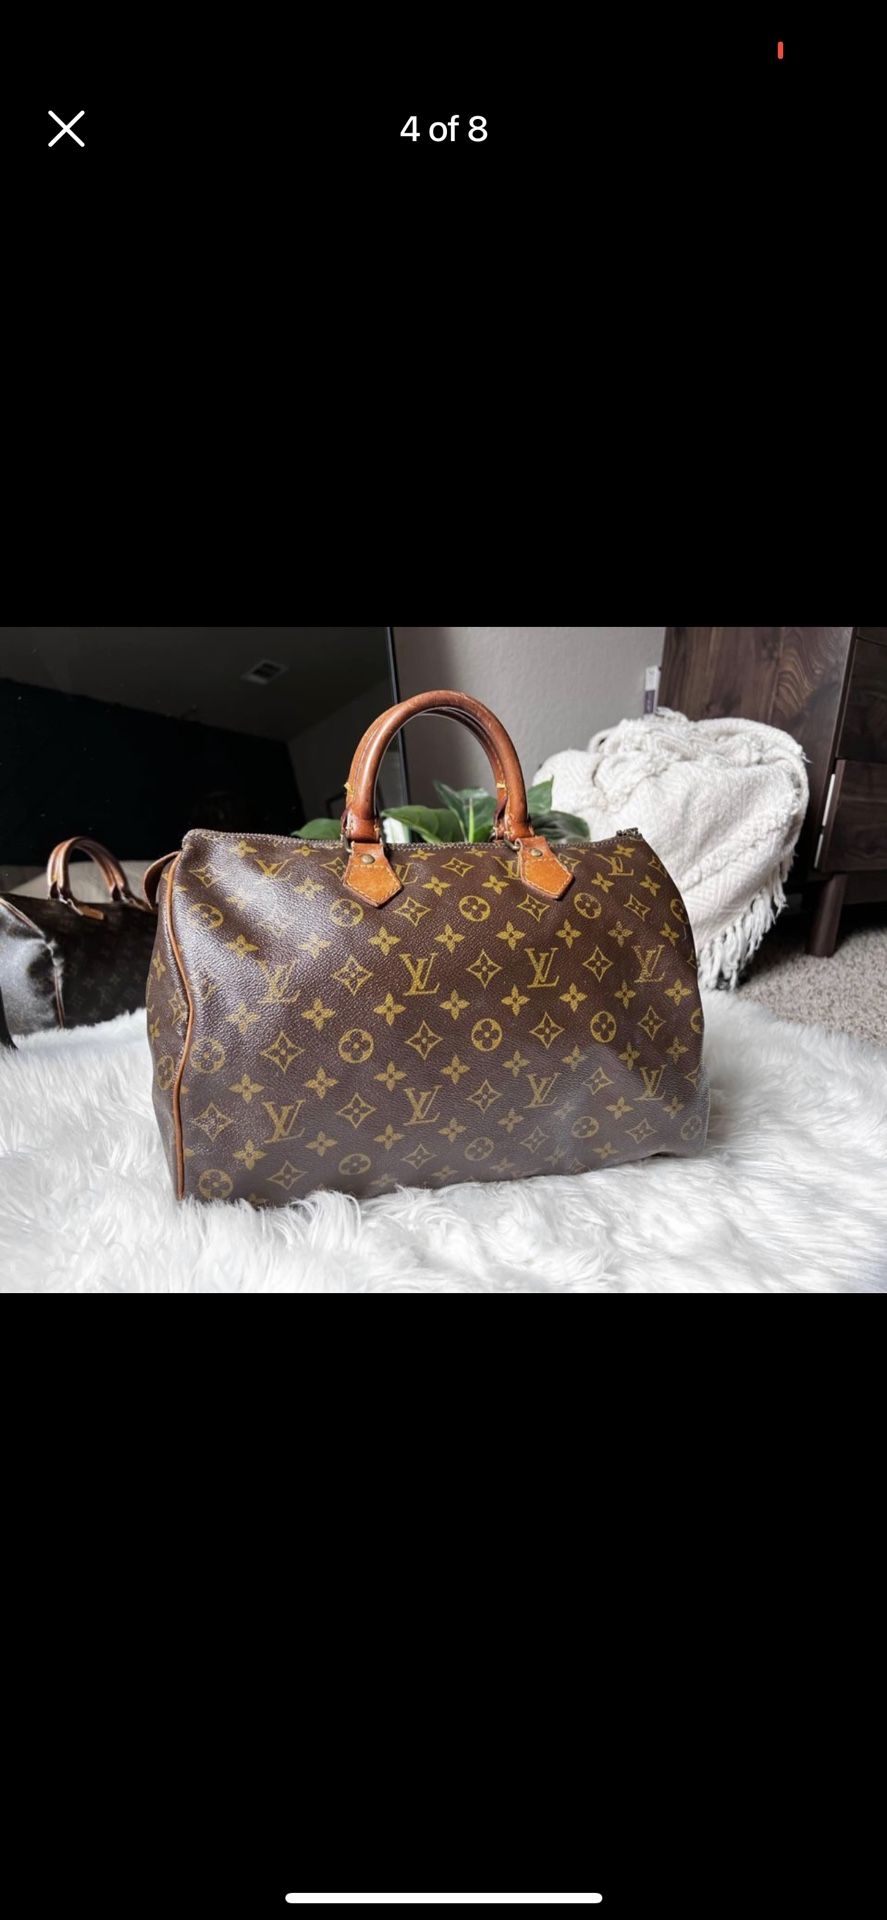 Louis Vuitton Speedy 35 Authentic for Sale in Andover, MA - OfferUp